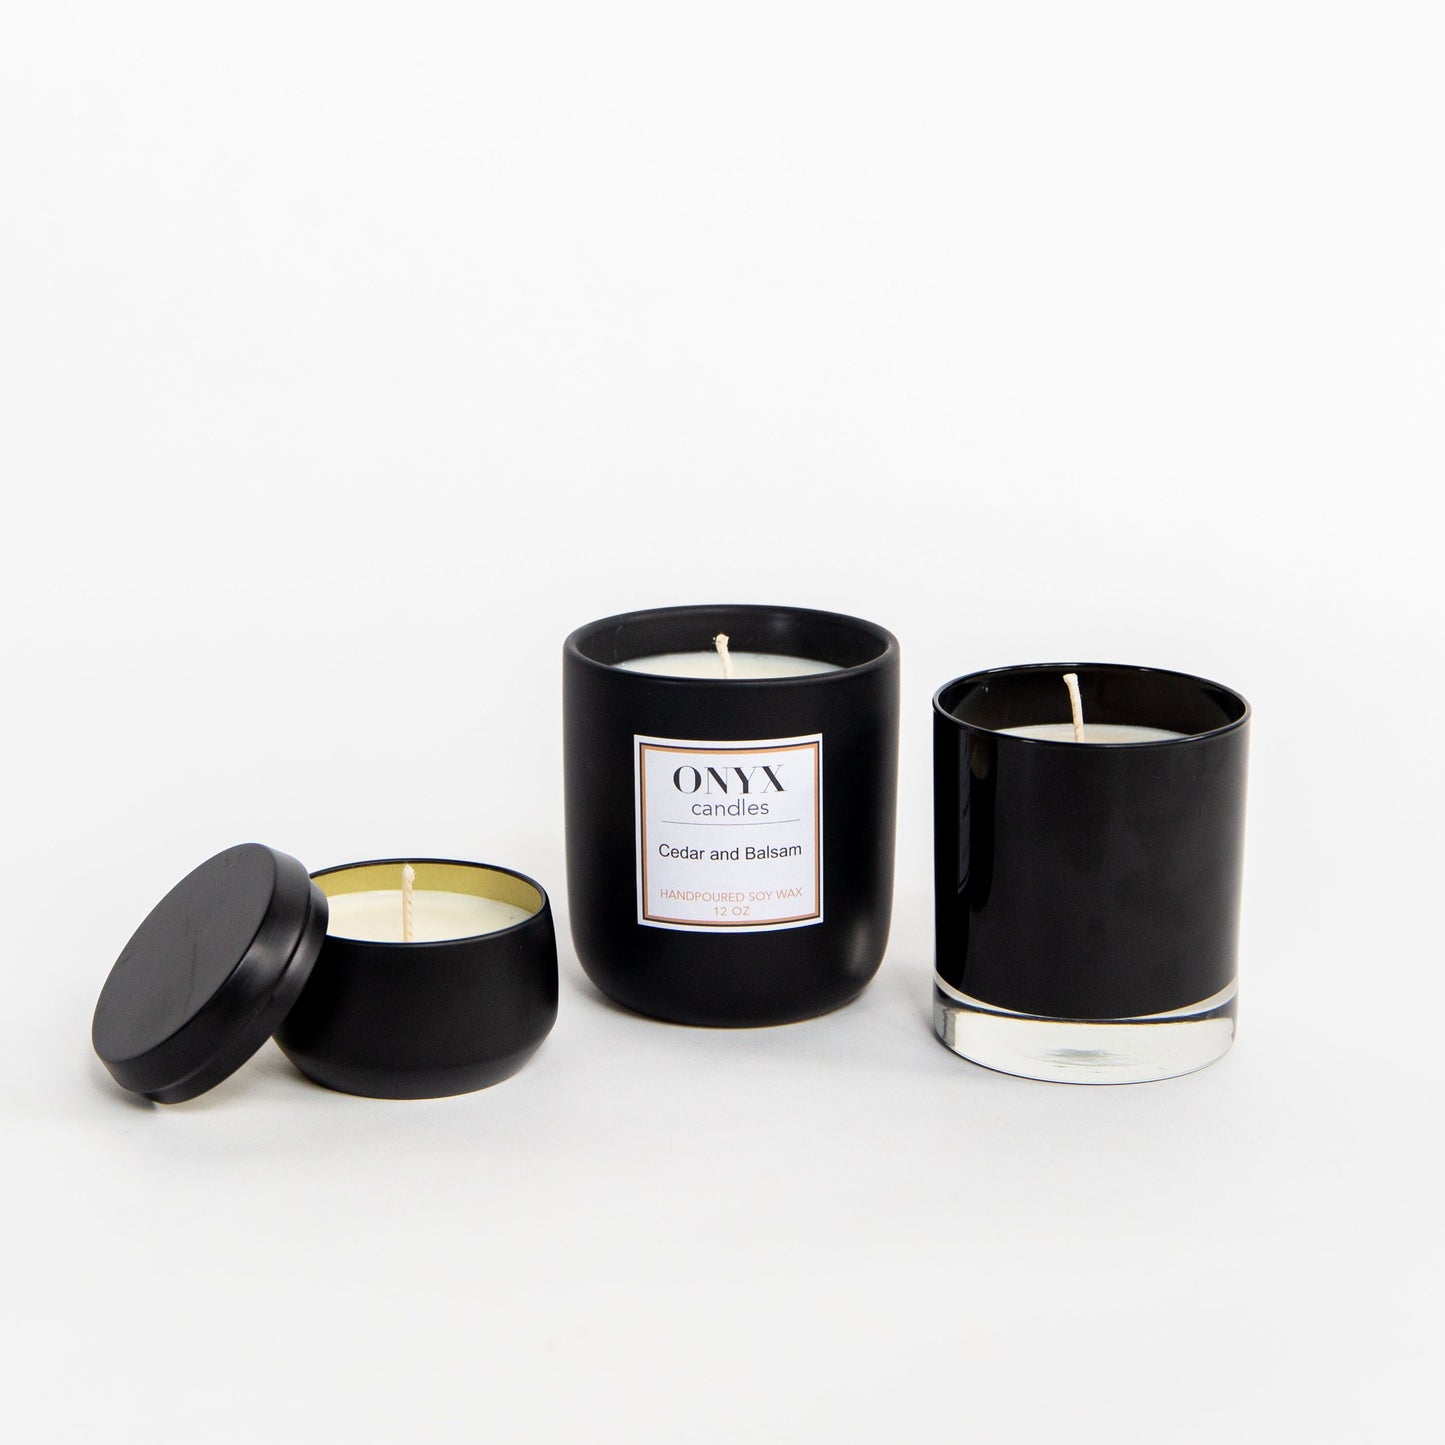 Pictured here are three size variations of Cedar and Balsam scented Onyx candles